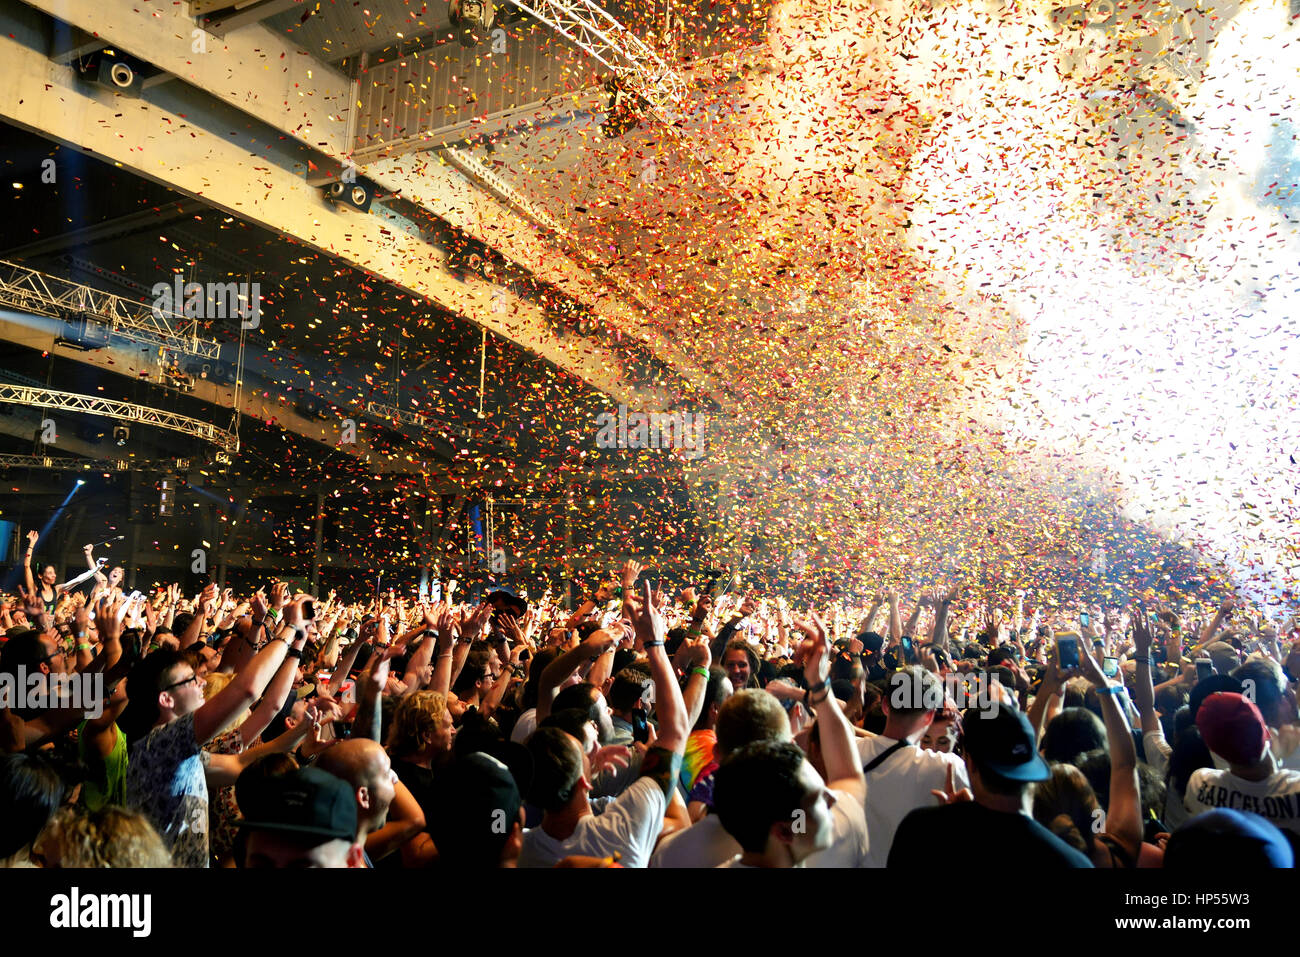 BARCELONA - JUN 19: Crowd in a concert, while throwing confetti from the stage at Sonar Festival on June 19, 2015 in Barcelona, Spain. Stock Photo